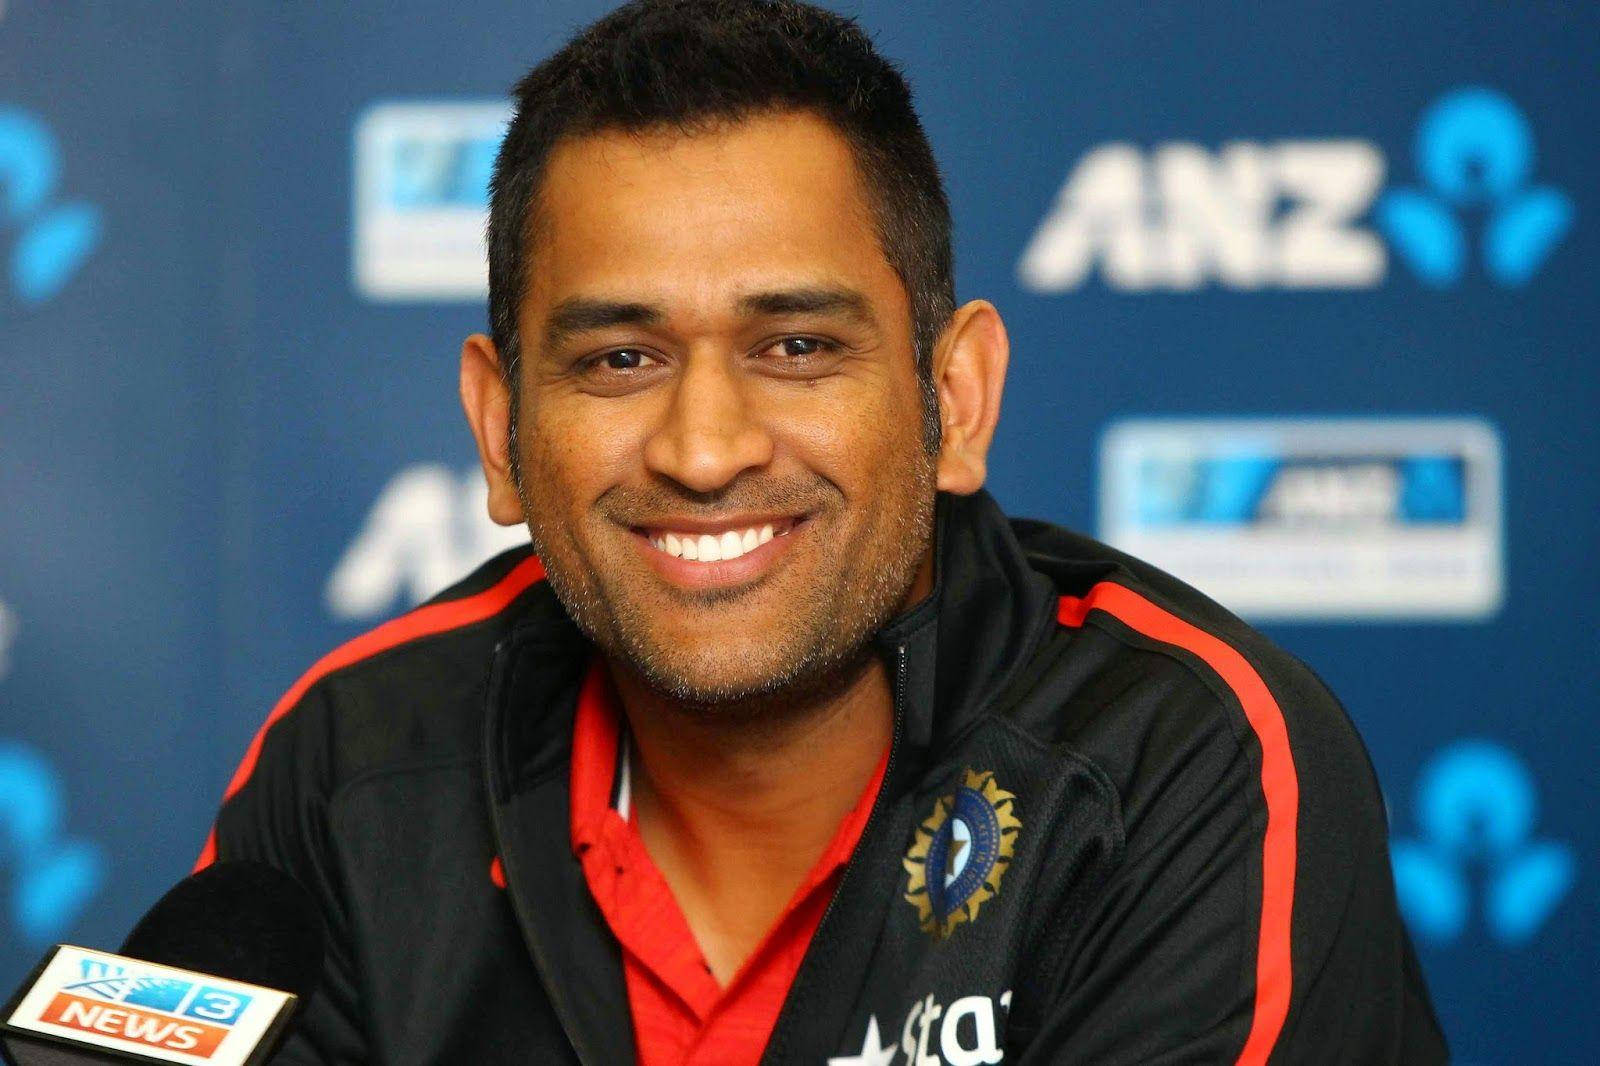 Download Ms Dhoni Interview Wallpaper | Wallpapers.com